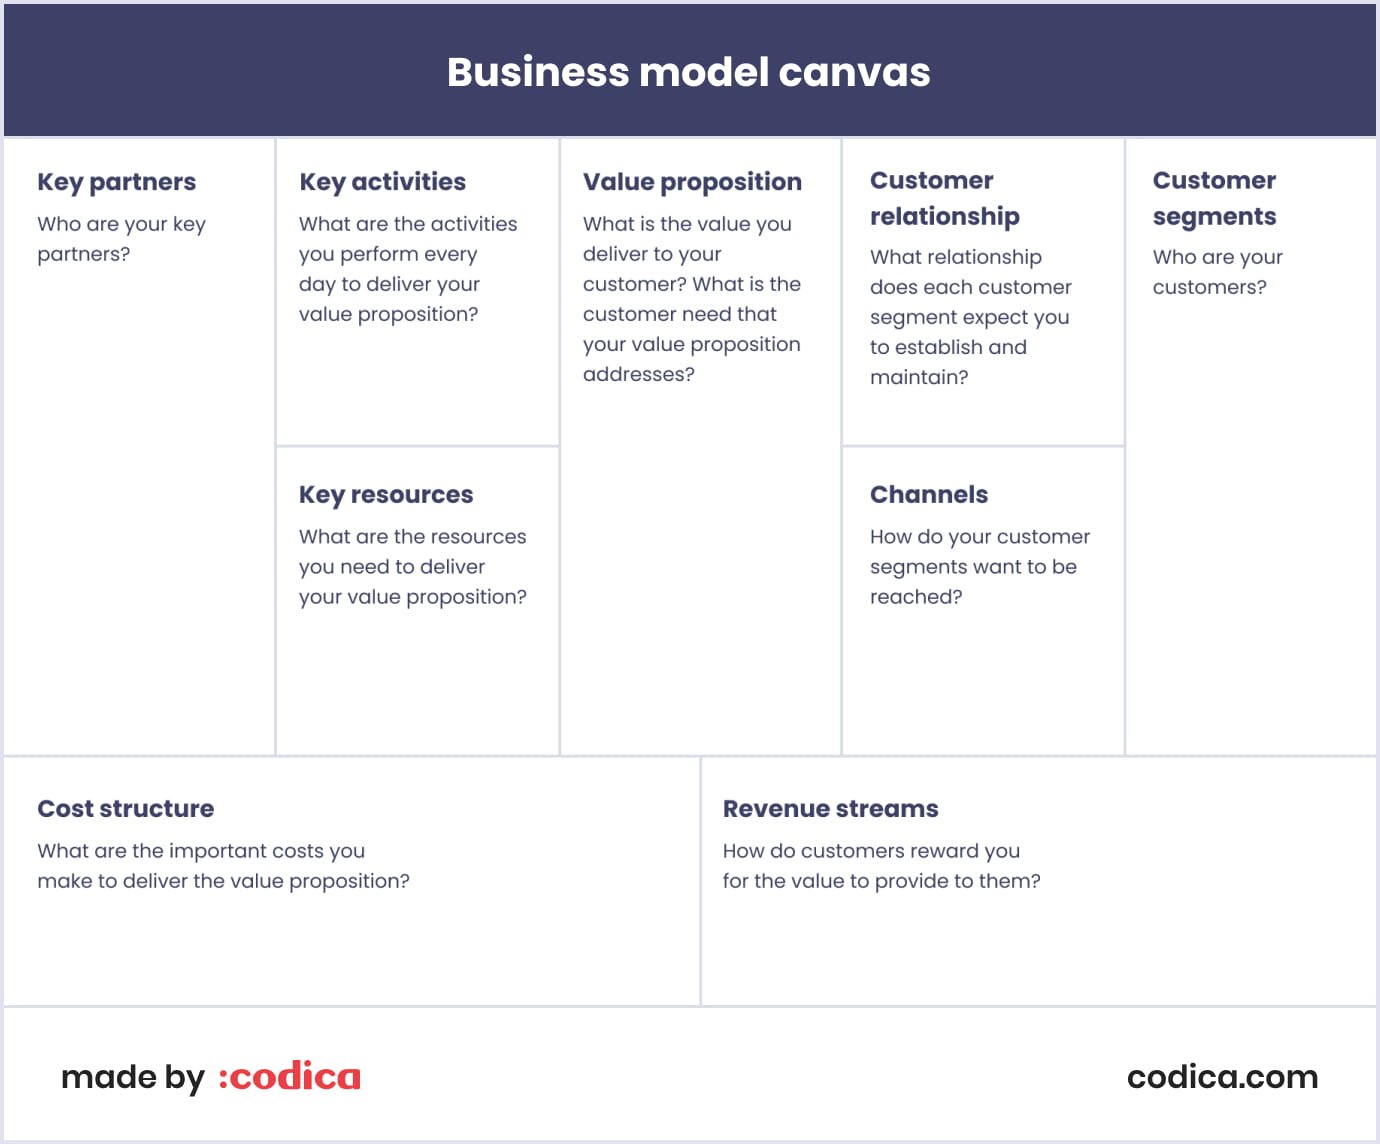 Business model canvas template